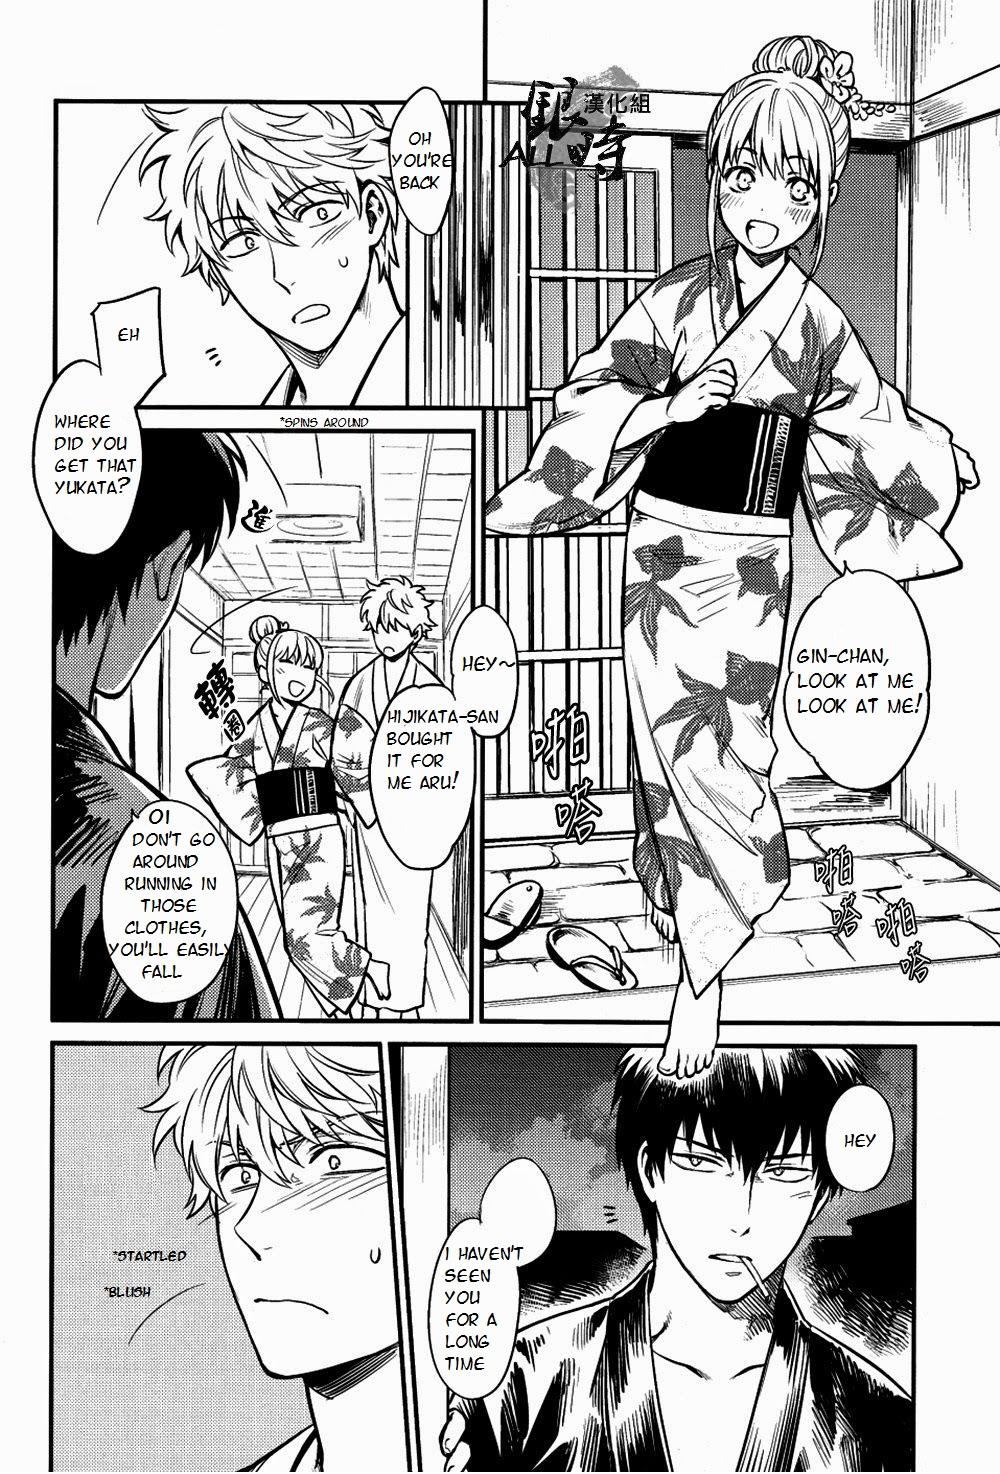 Swinger Please! Gintoki - Gintama And - Page 7